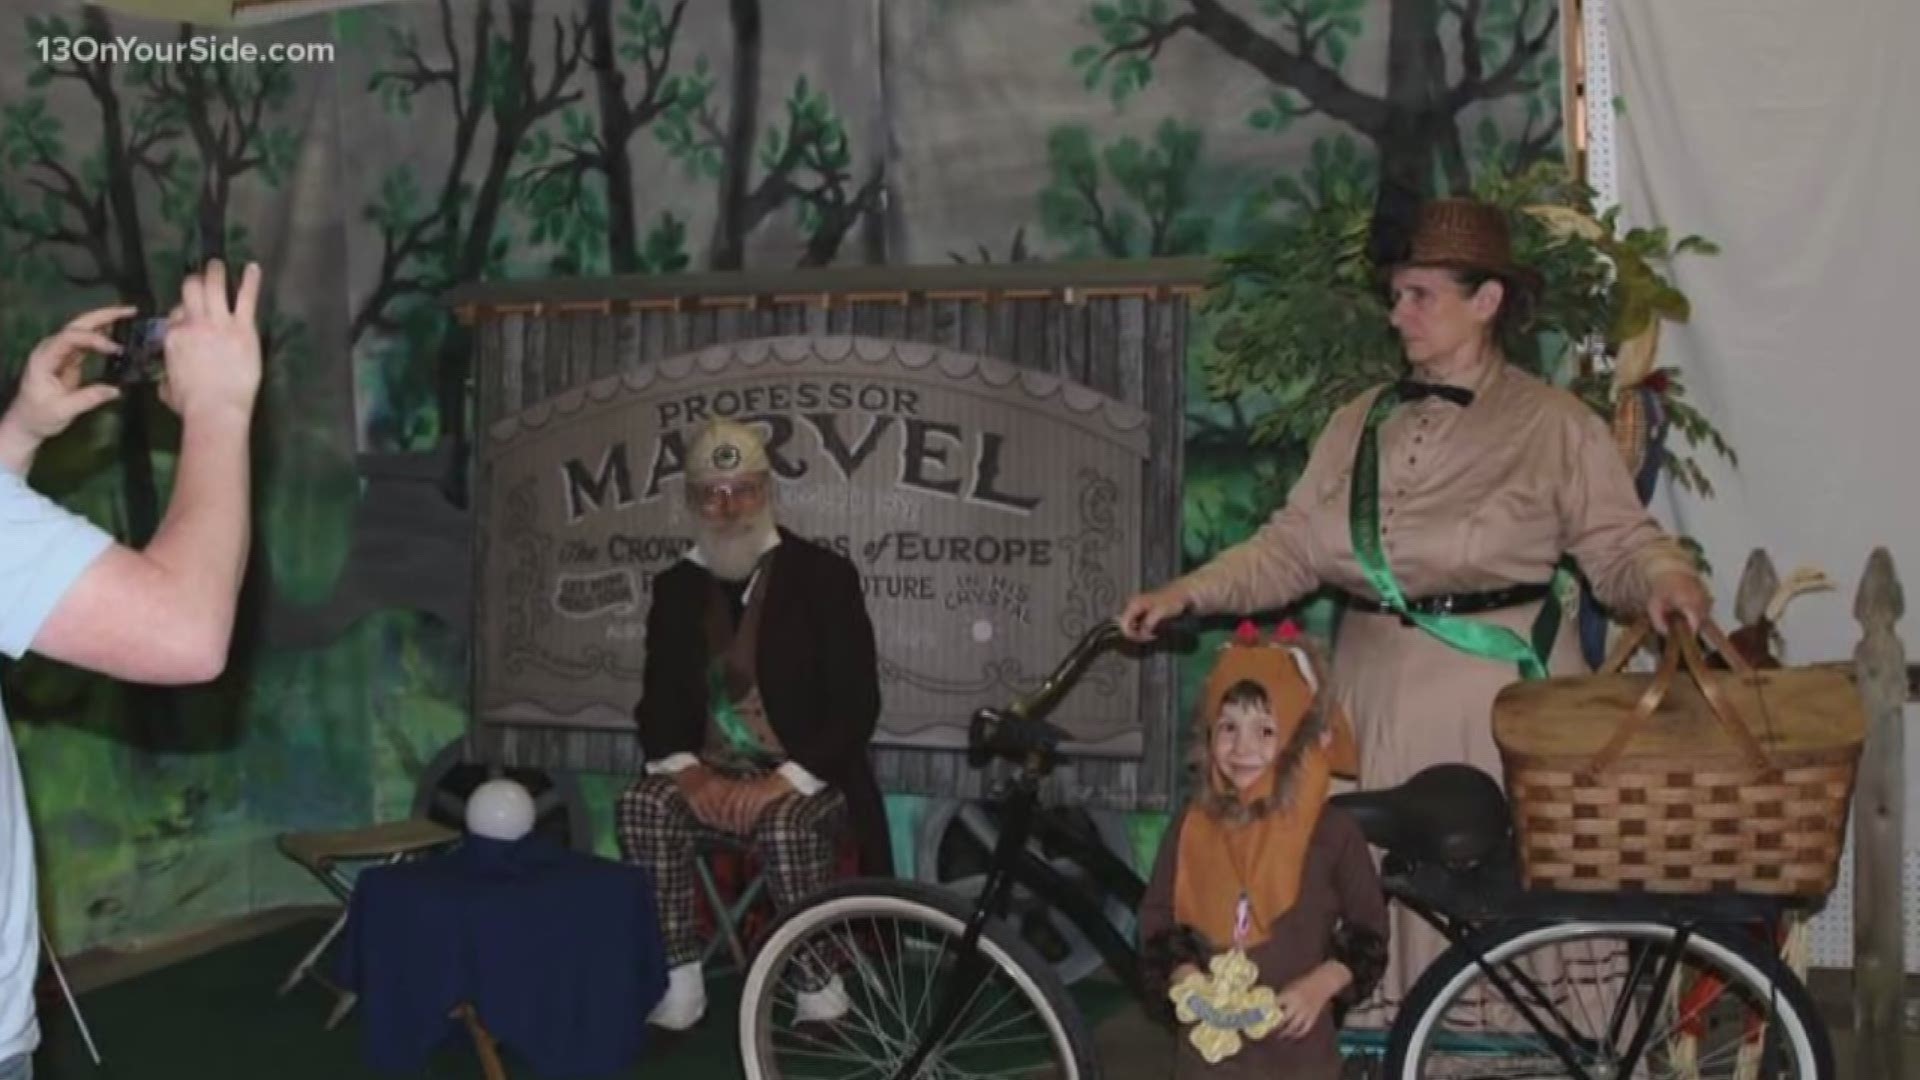 Michigan Wizard of Oz Festival coming to downtown Ionia